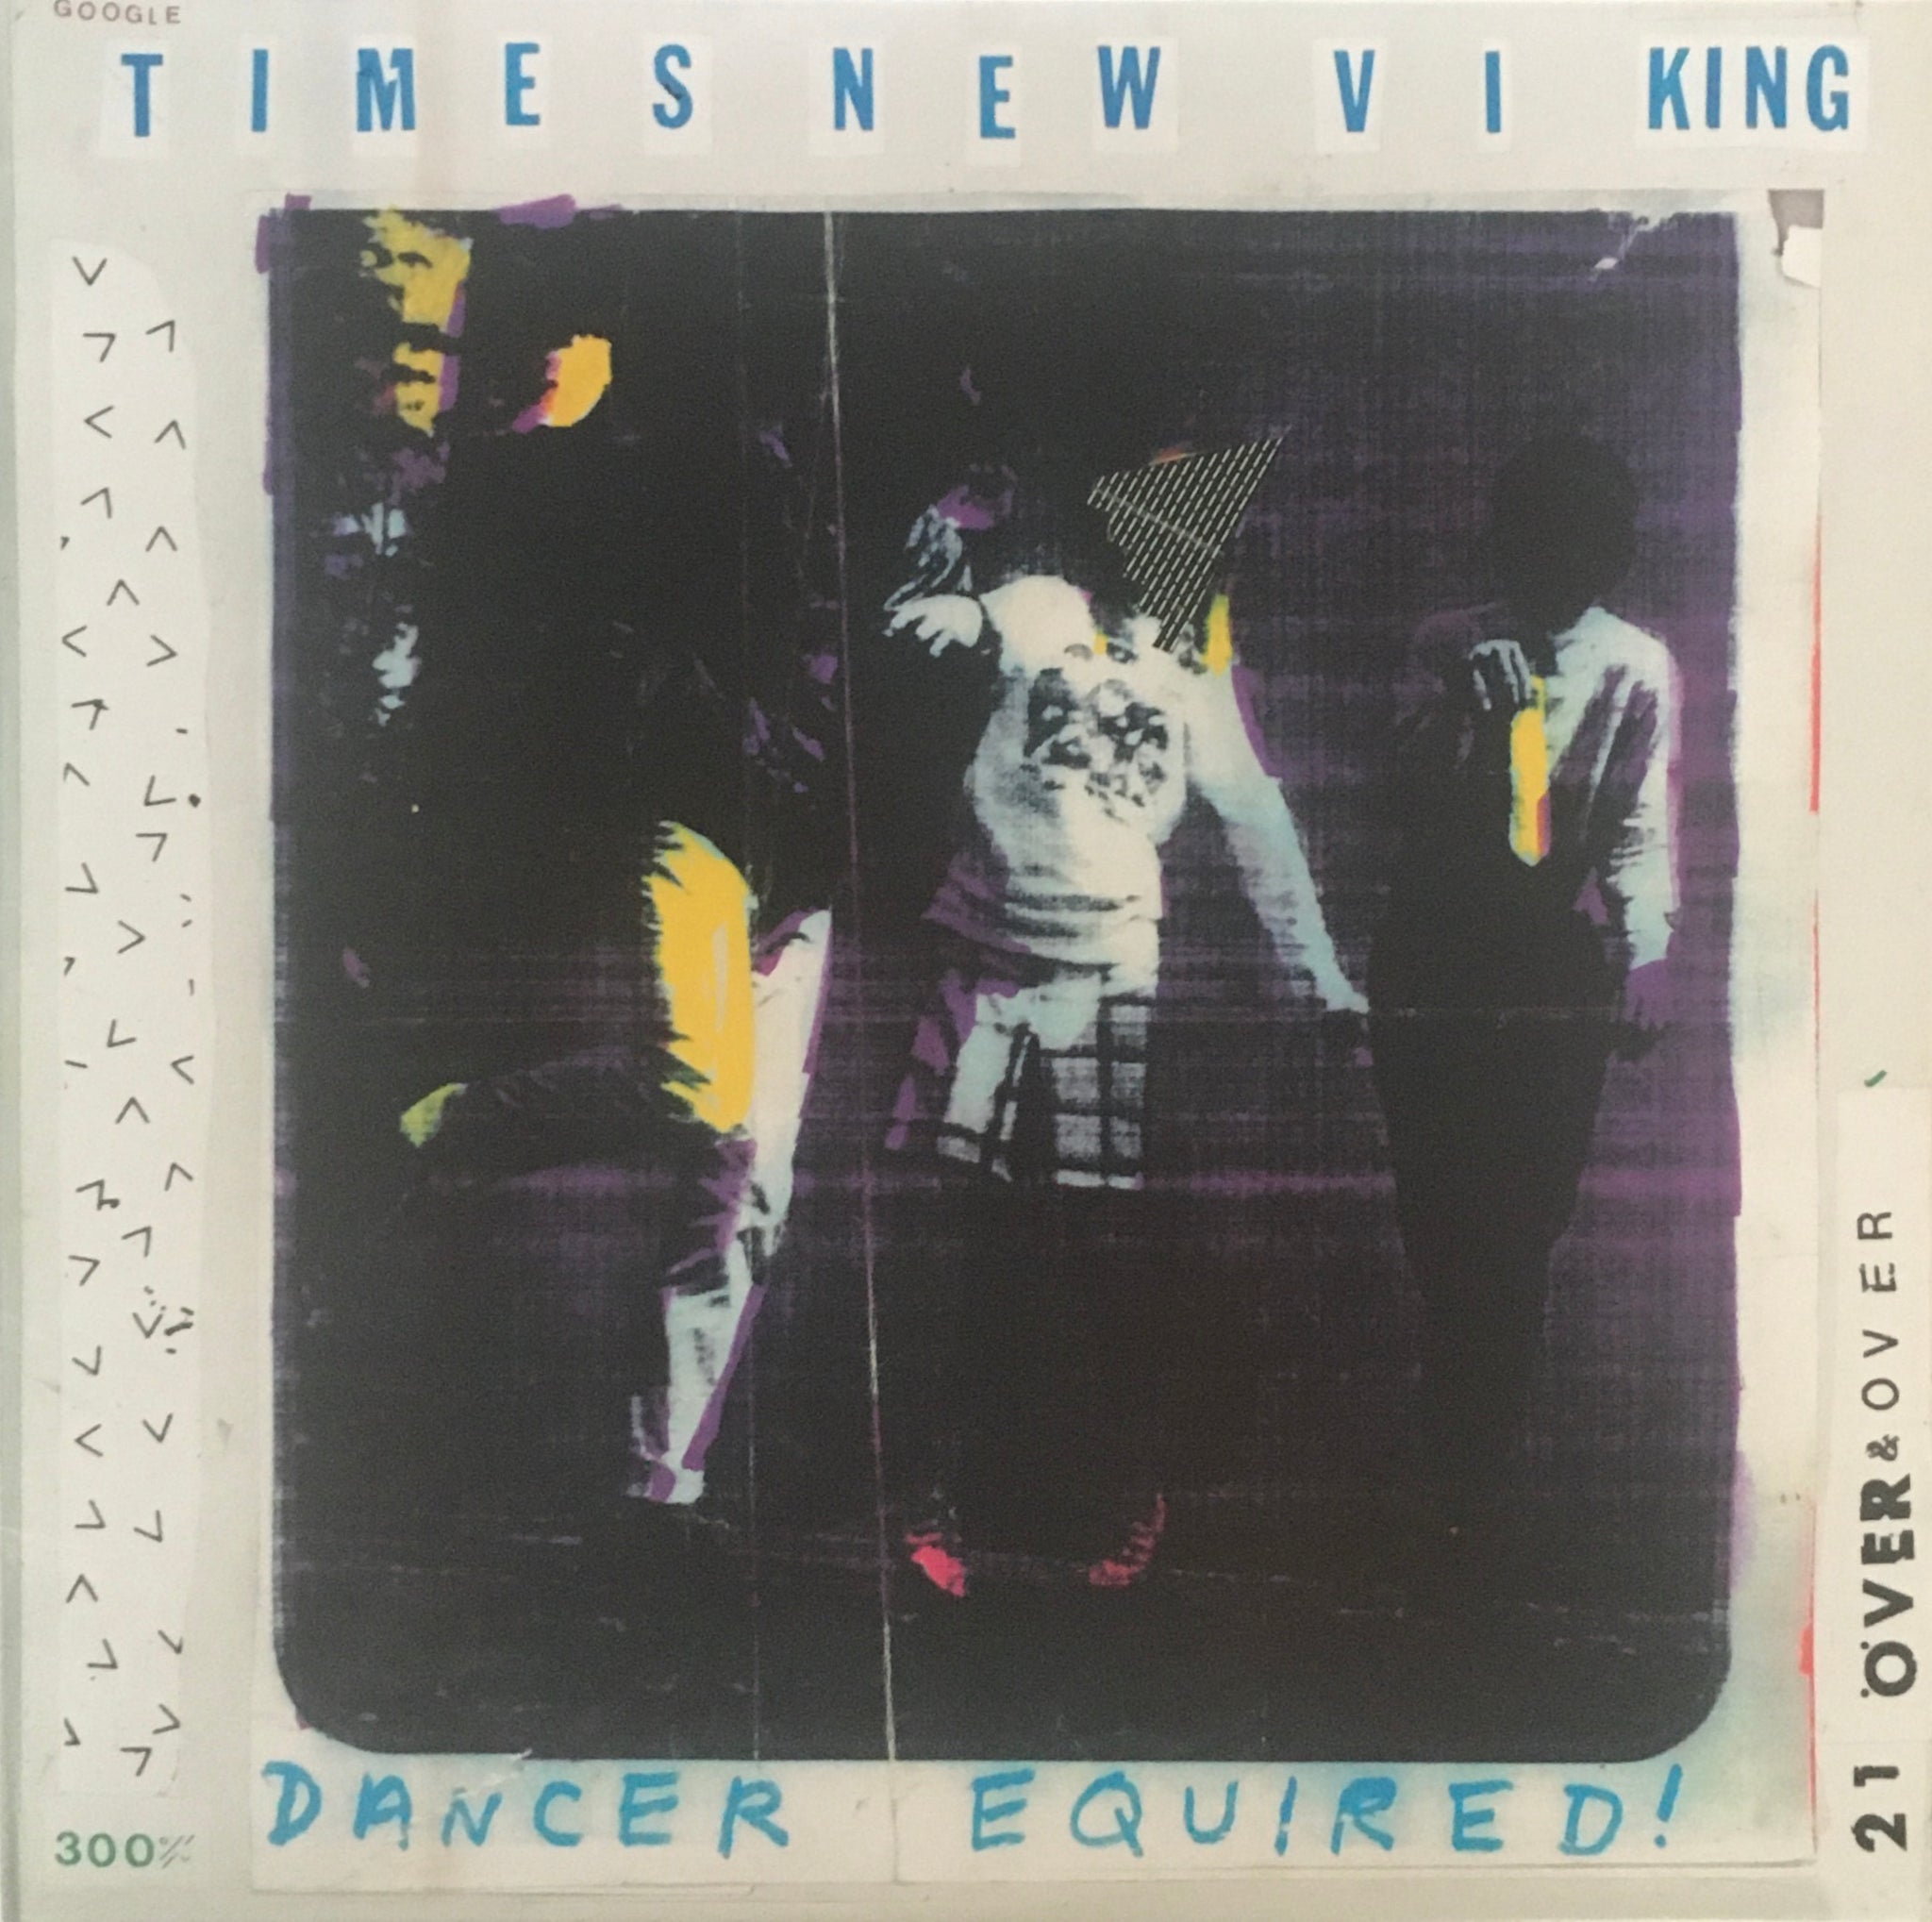 Times New Viking "Dancer Equired" LP (2011)